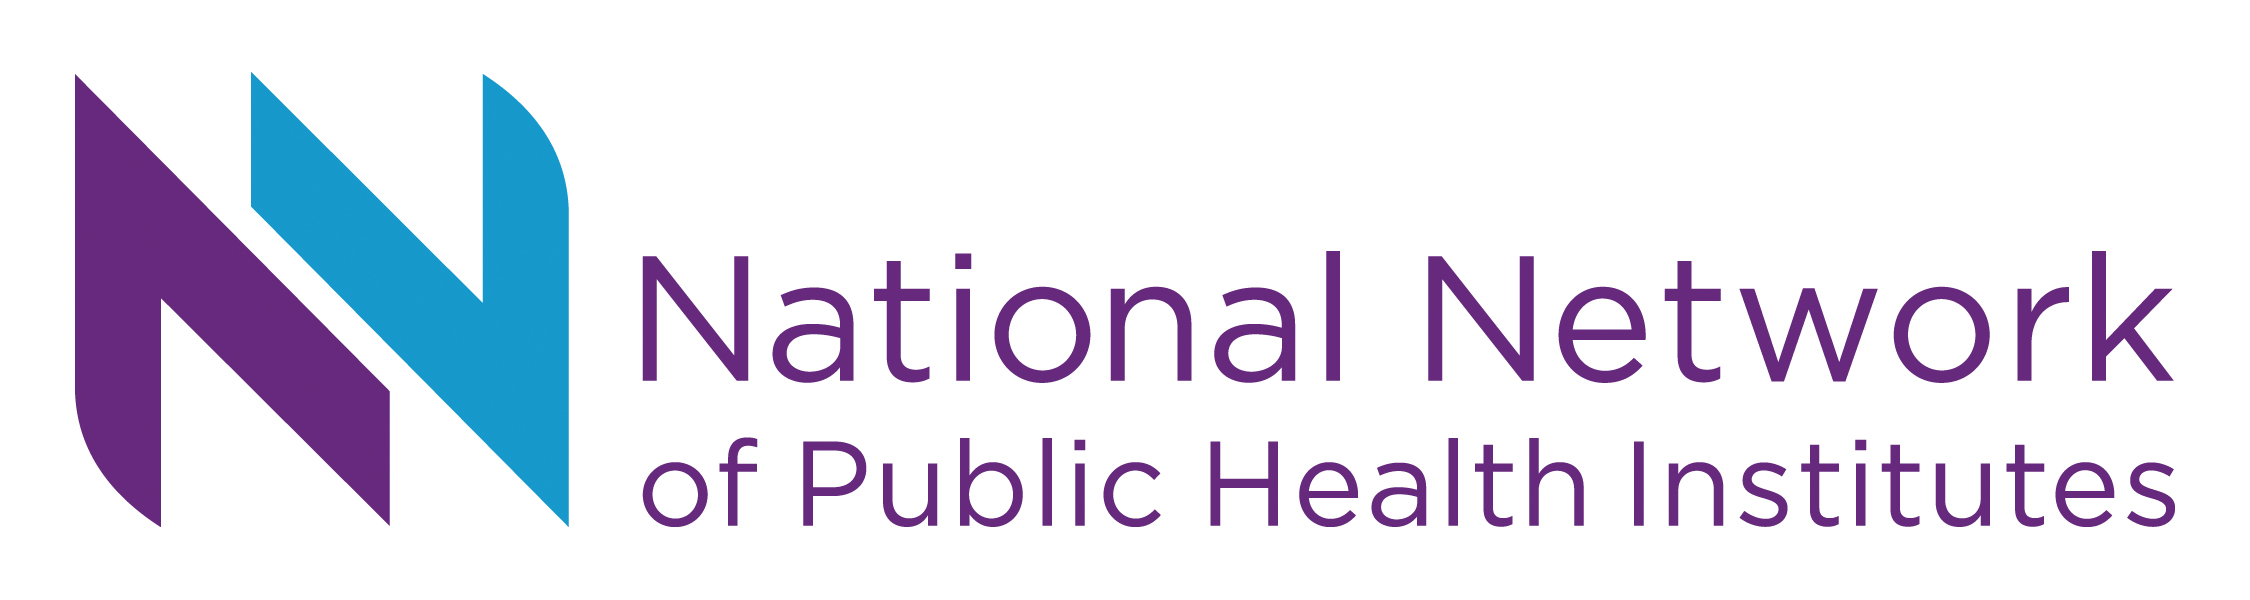 National Network of Public Health Institutes